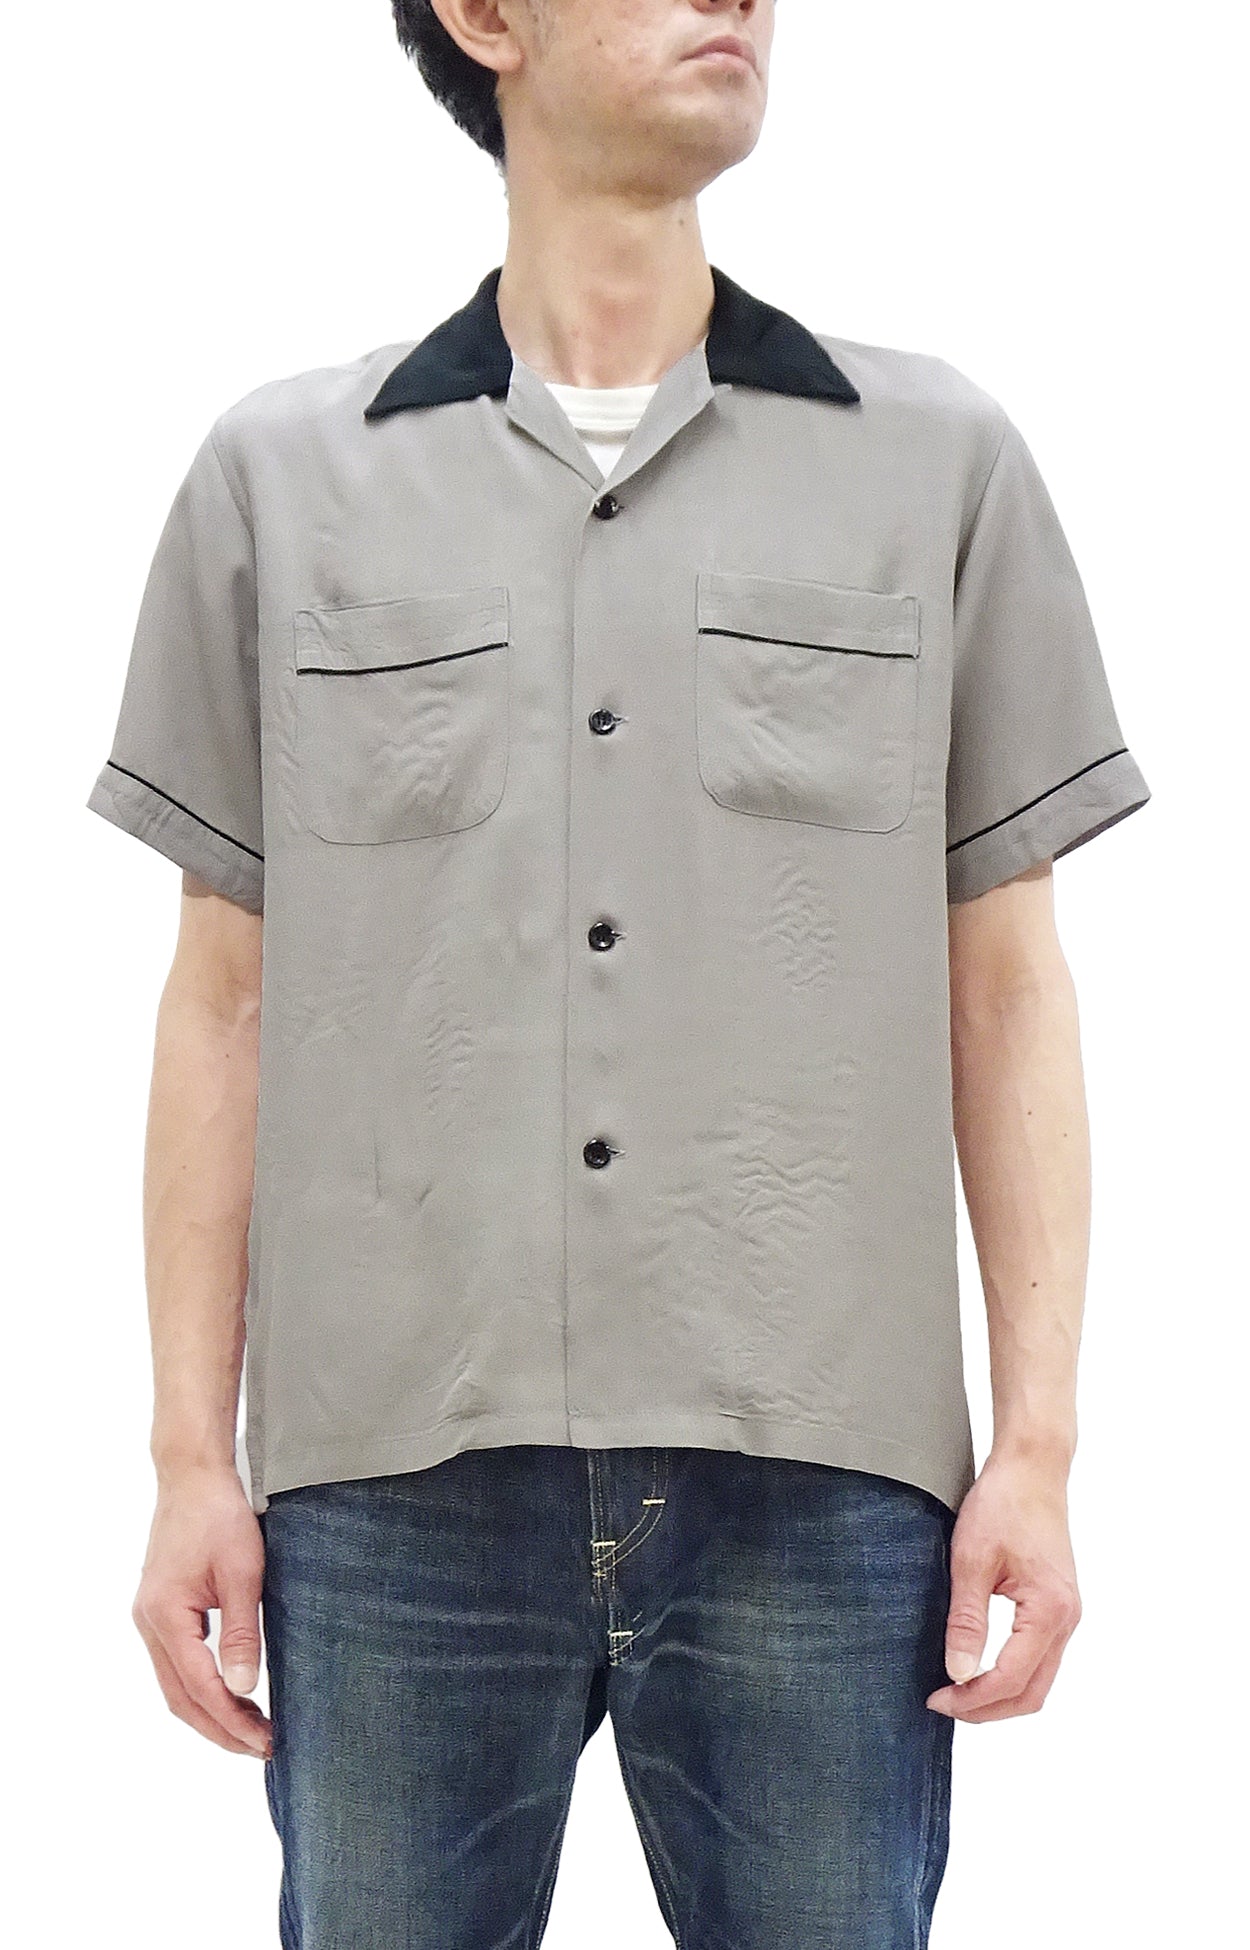 Style Eyes Two-Tone Rayon Bowling Shirt Men's 1950s Style Short Sleeve  Button Up Shirt SE39260 115 Faded-Gray